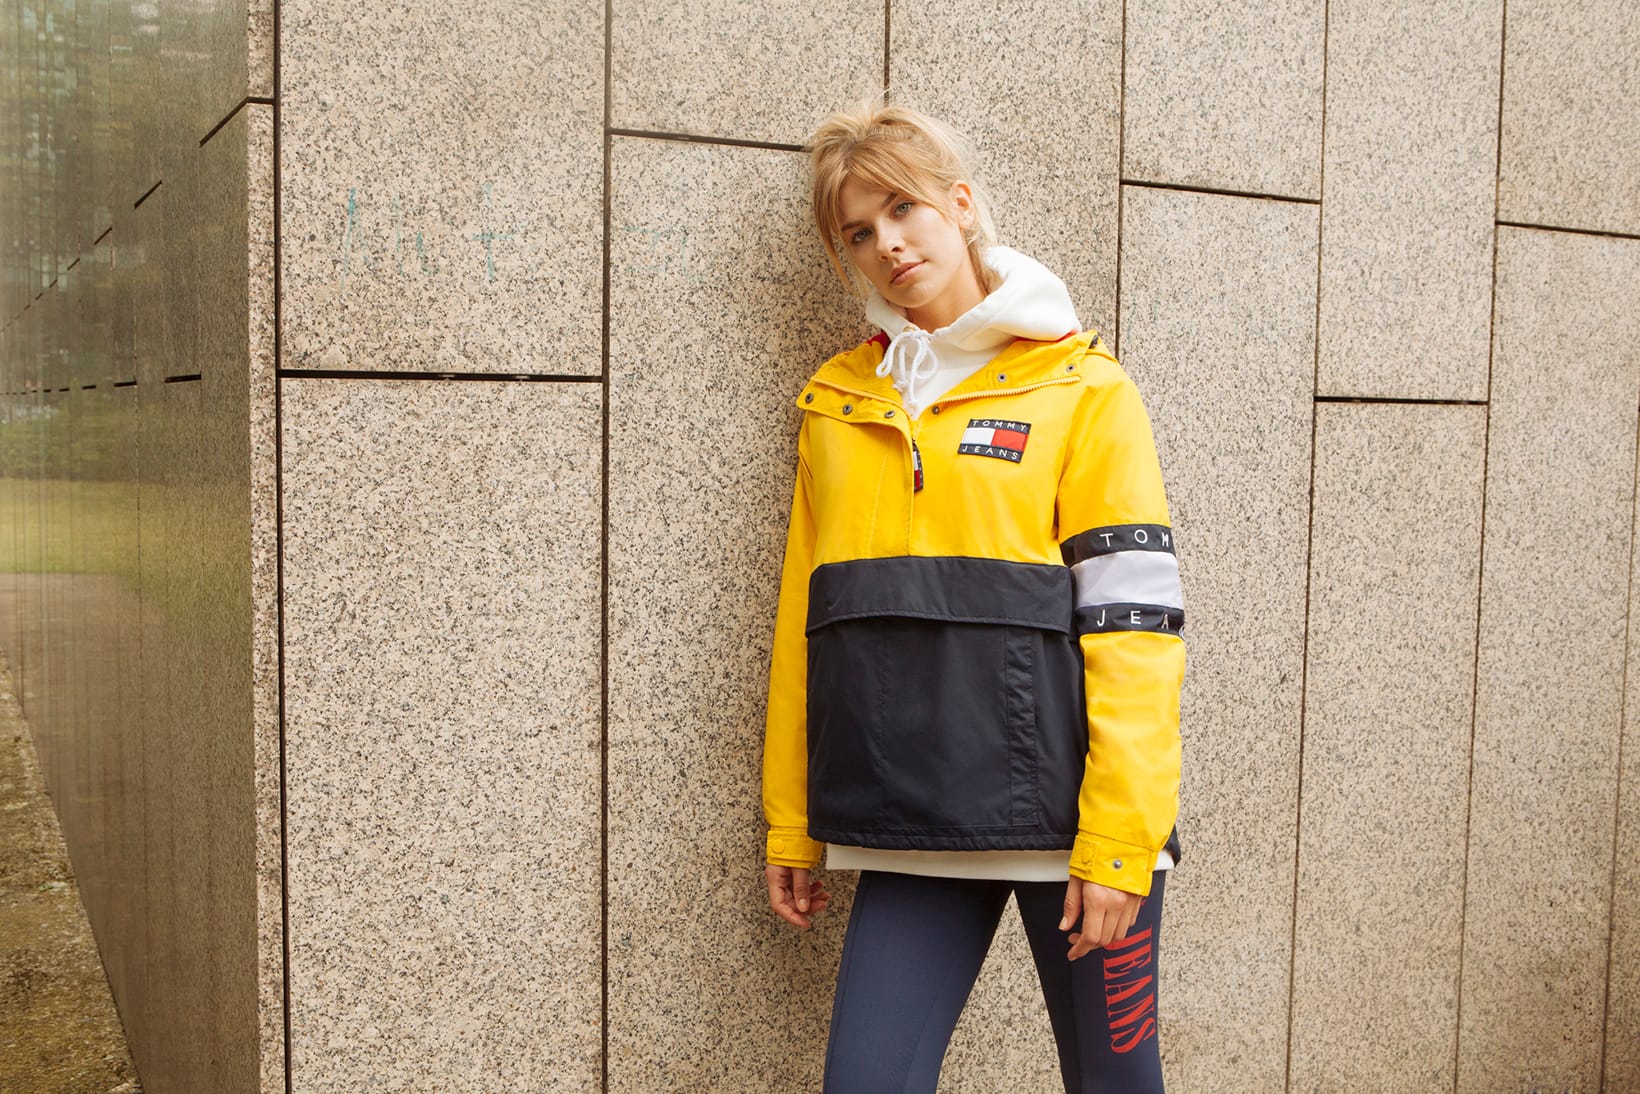 tommy capsule collection